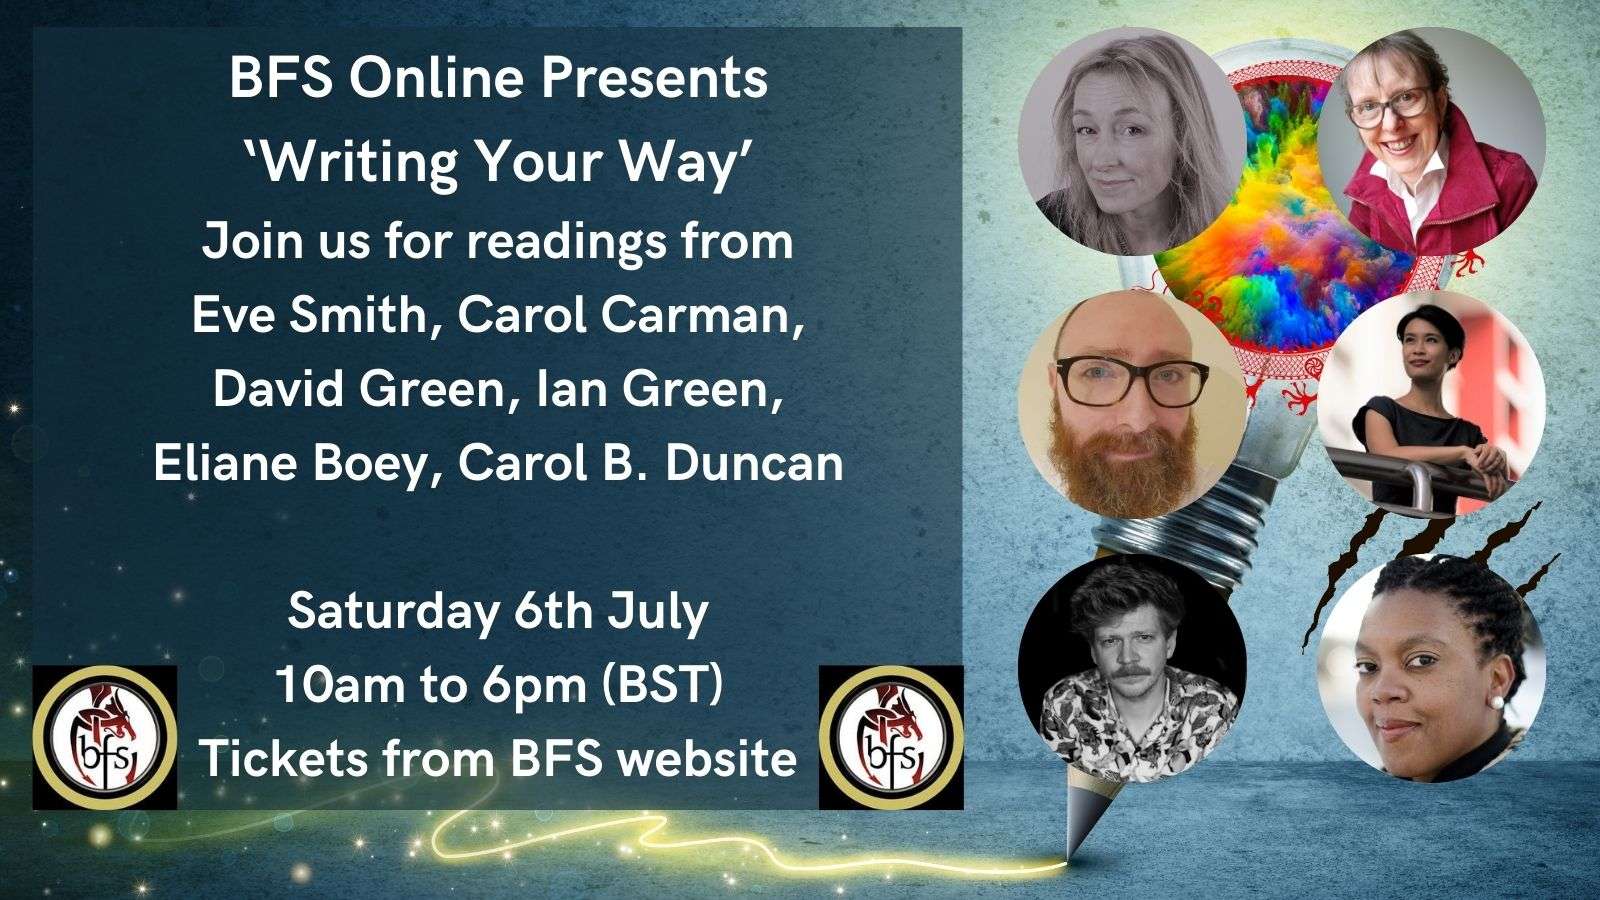 BFS Online: Writing Your Way – Readings